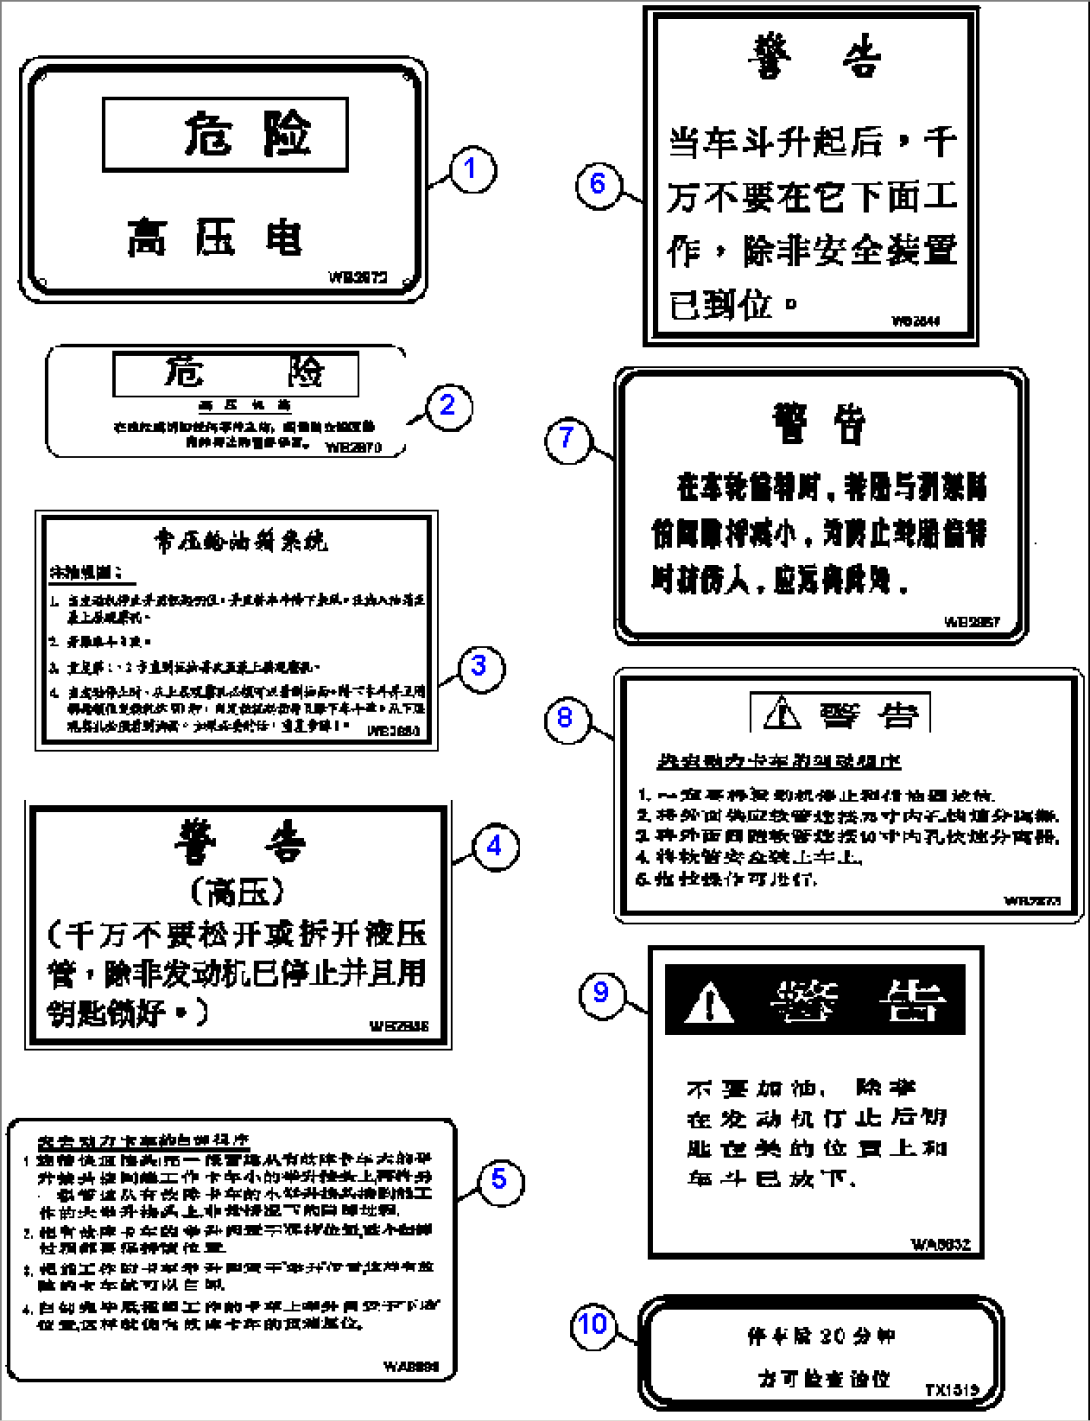 DECALS & WARNINGS (CHINESE)